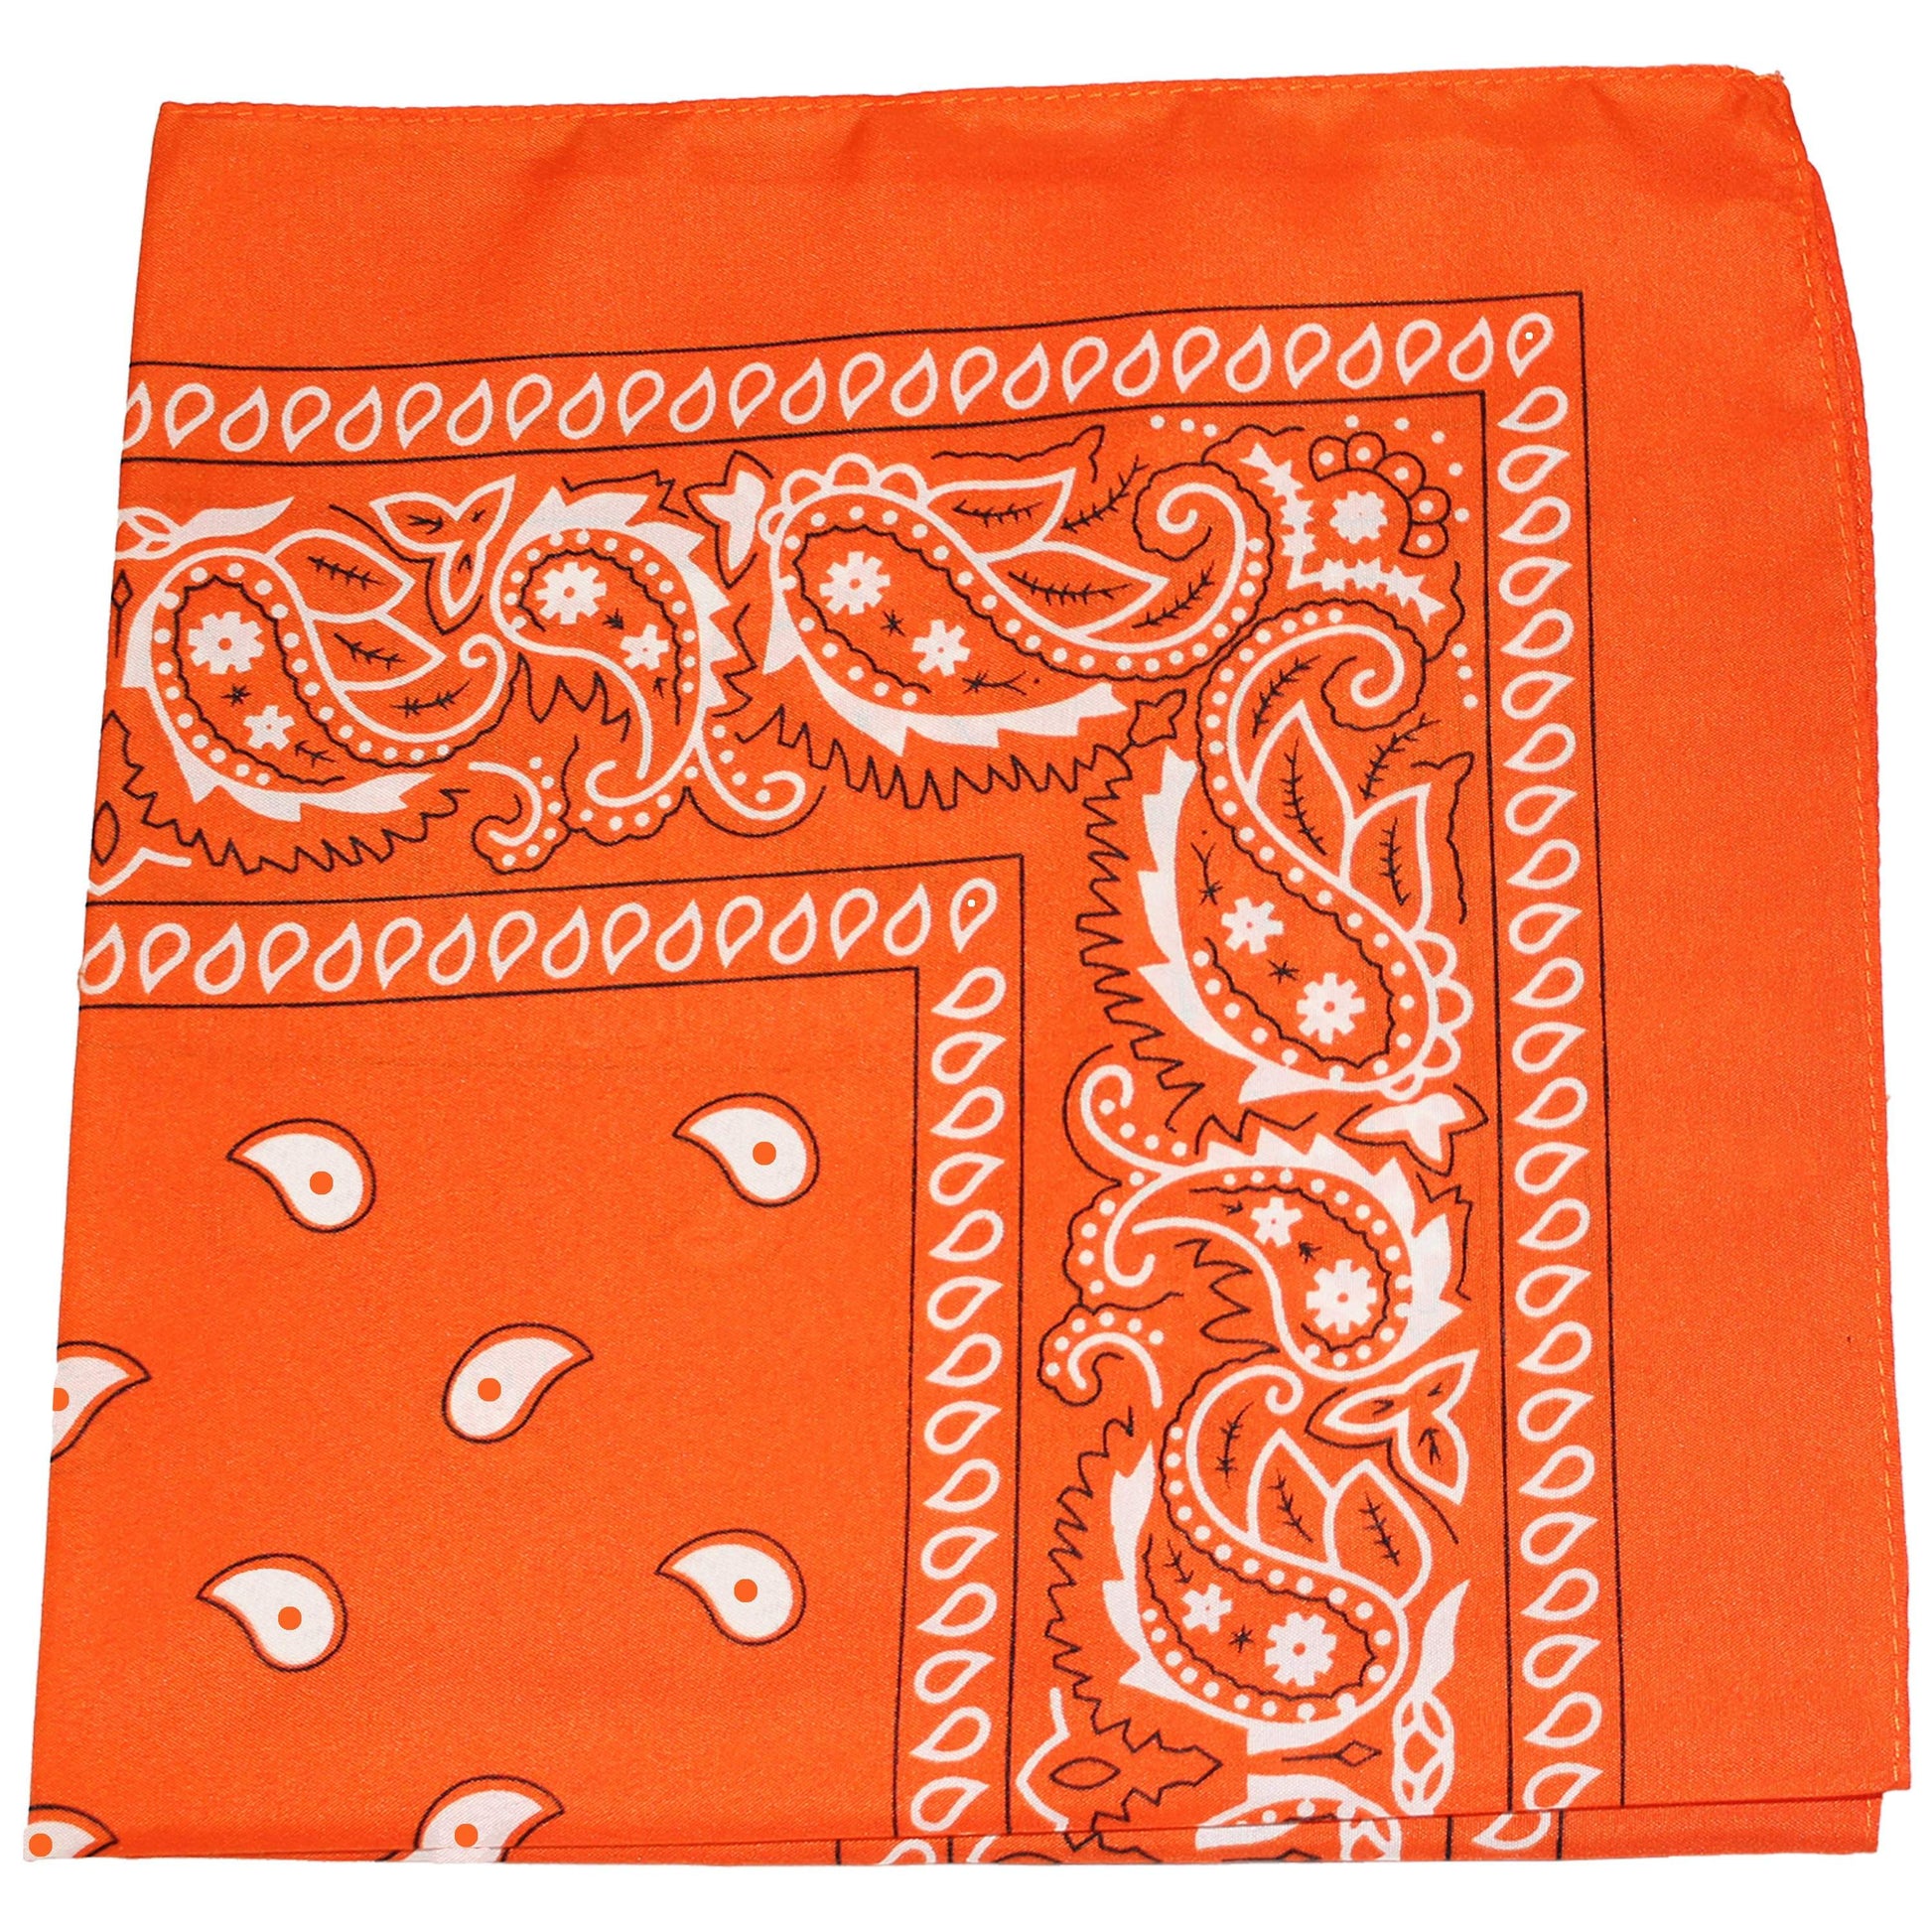 Mechaly Paisley 100% Cotton Double Sided Bandanas - 36 Pack